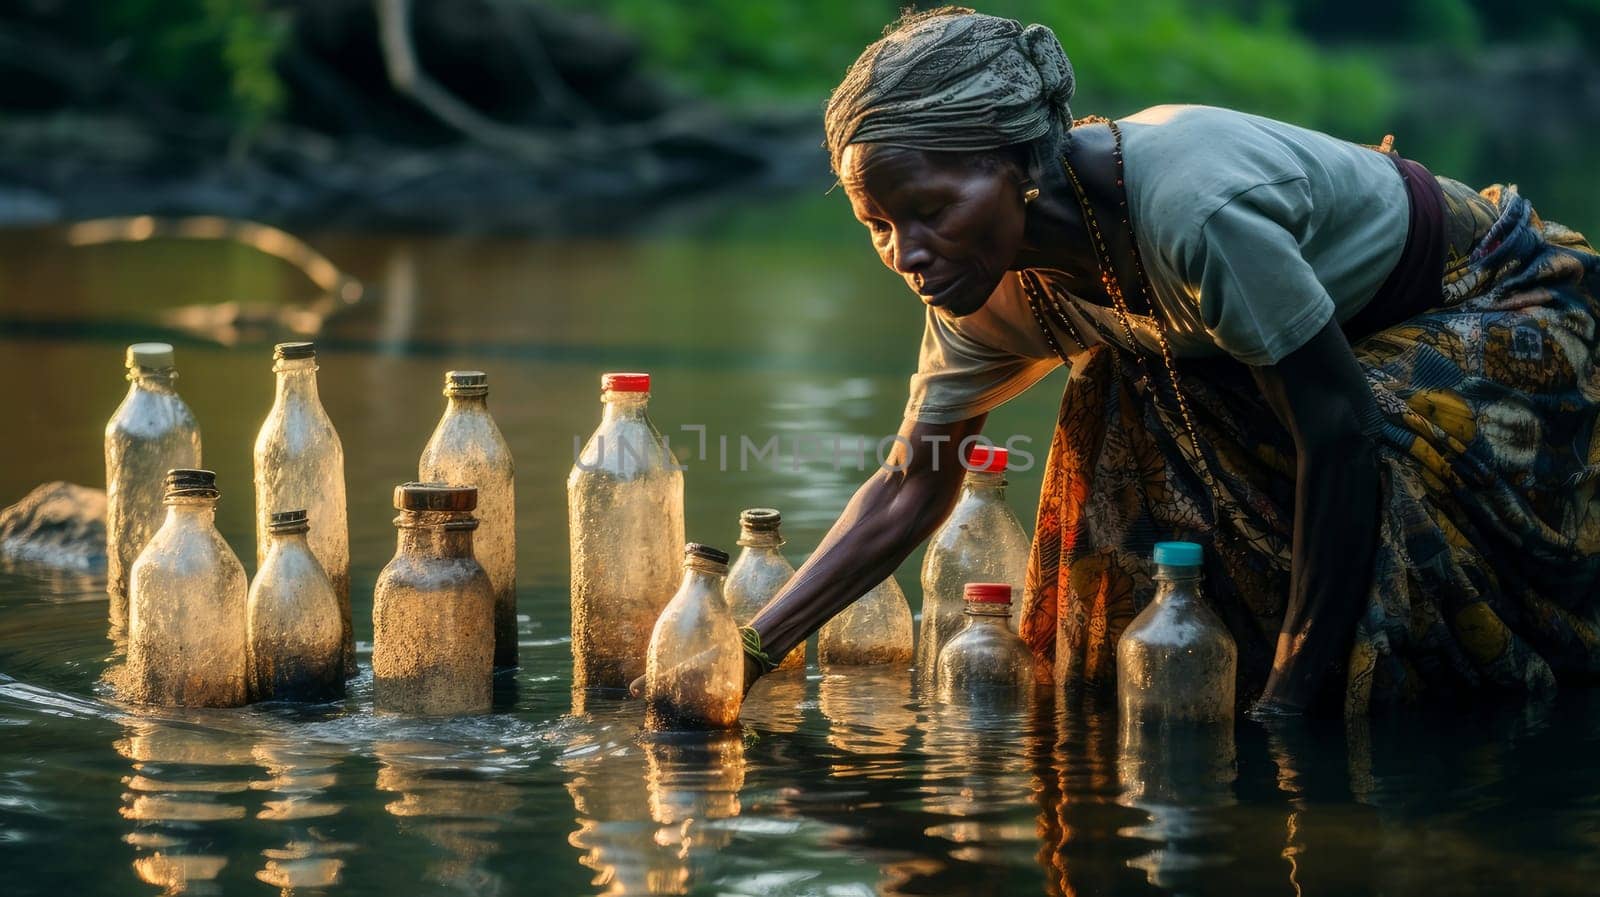 Poor, beggar, hungry dark-skinned old, thin elderly woman in Africa washes dishes in a dirty river, unsanitary conditions. by Alla_Yurtayeva